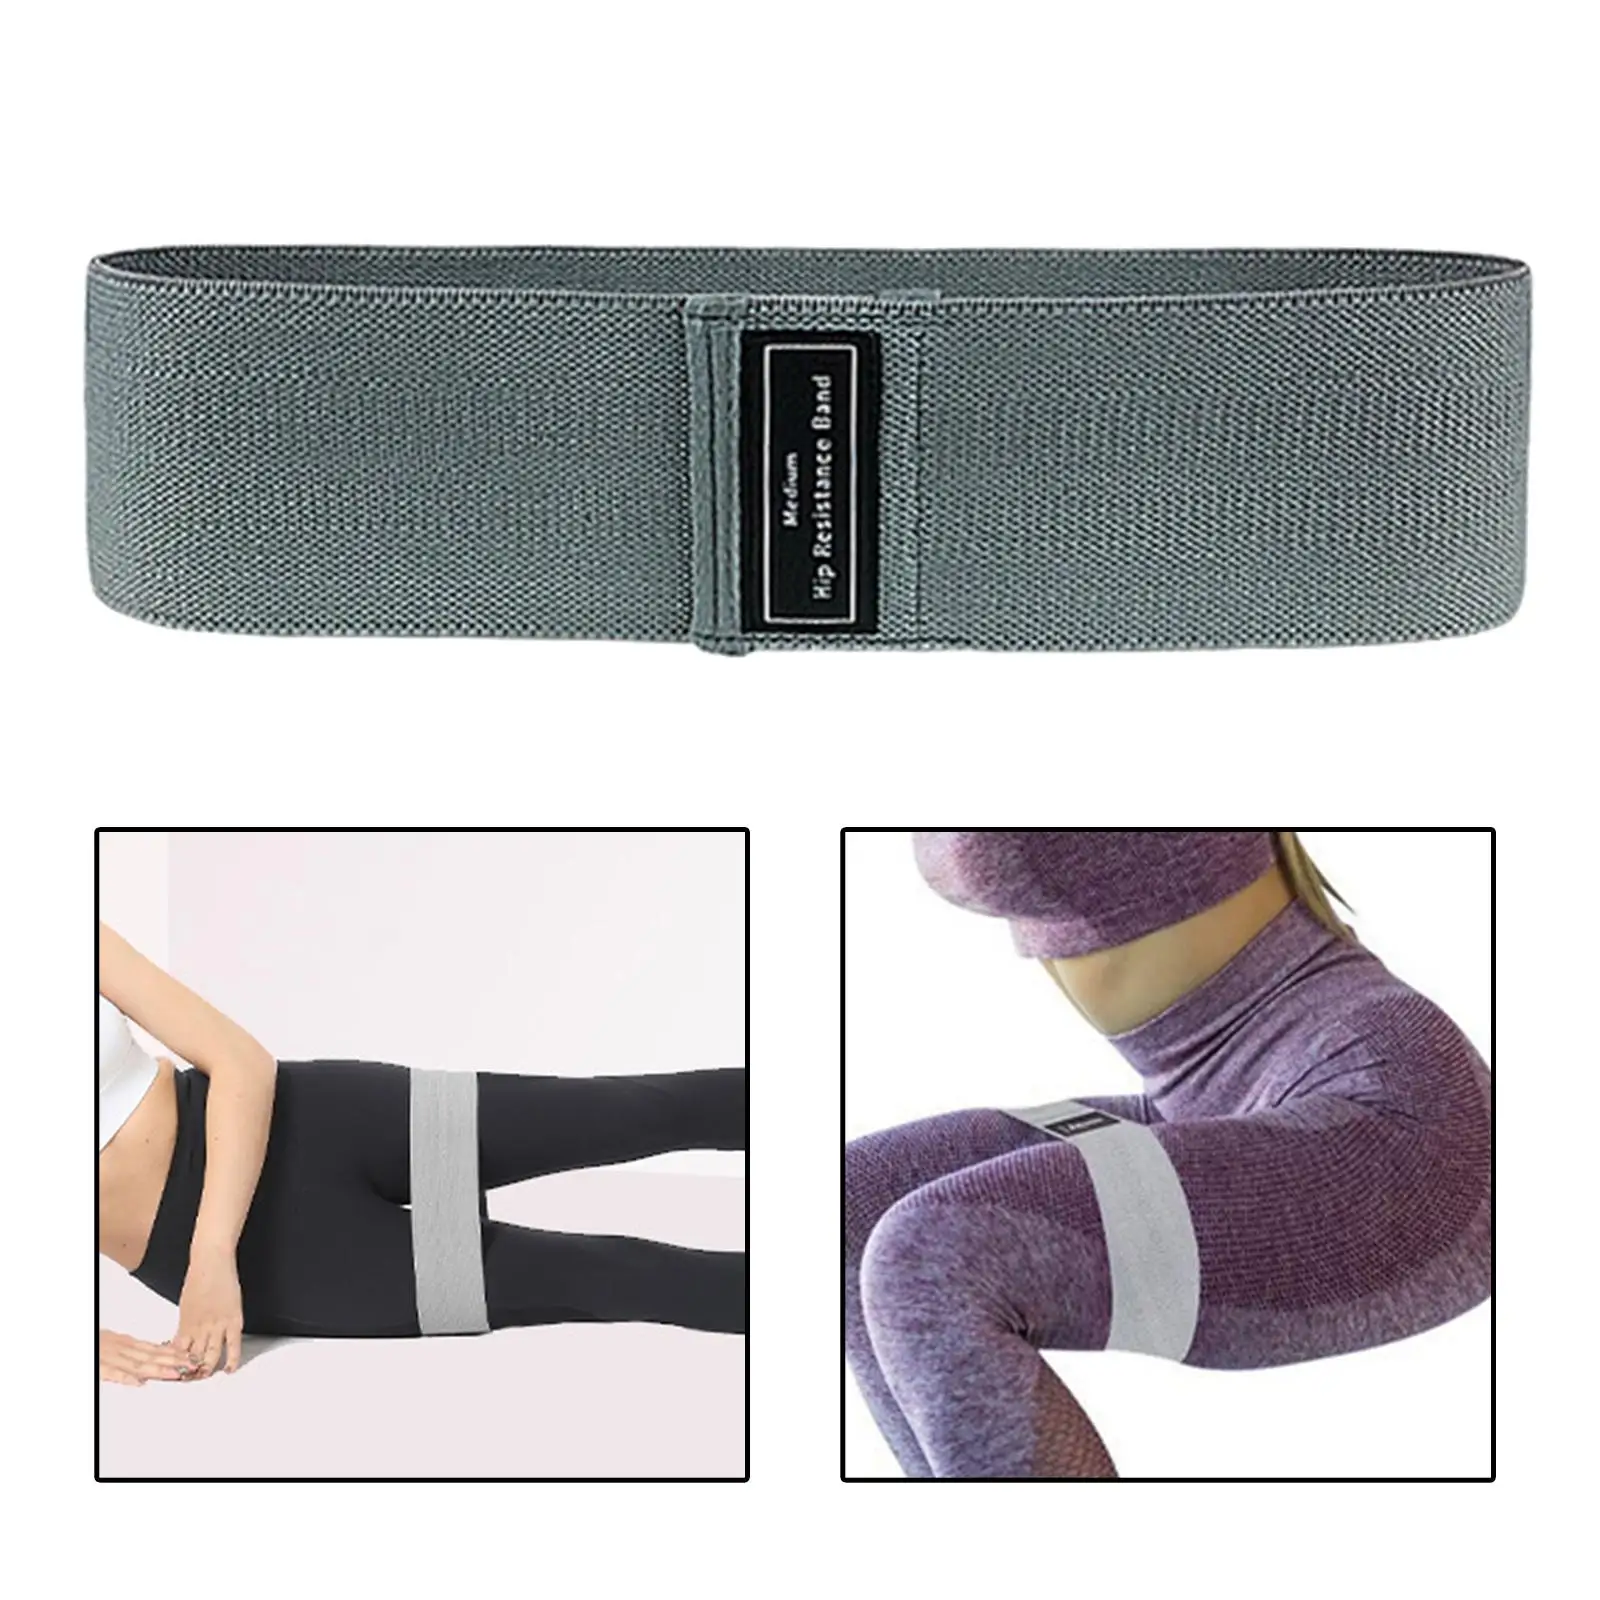 Portable Resistance Band, Exercise Home and Gym Work out Stretching Strap Elastic Belt for , Leg, Booty, Glutes Training